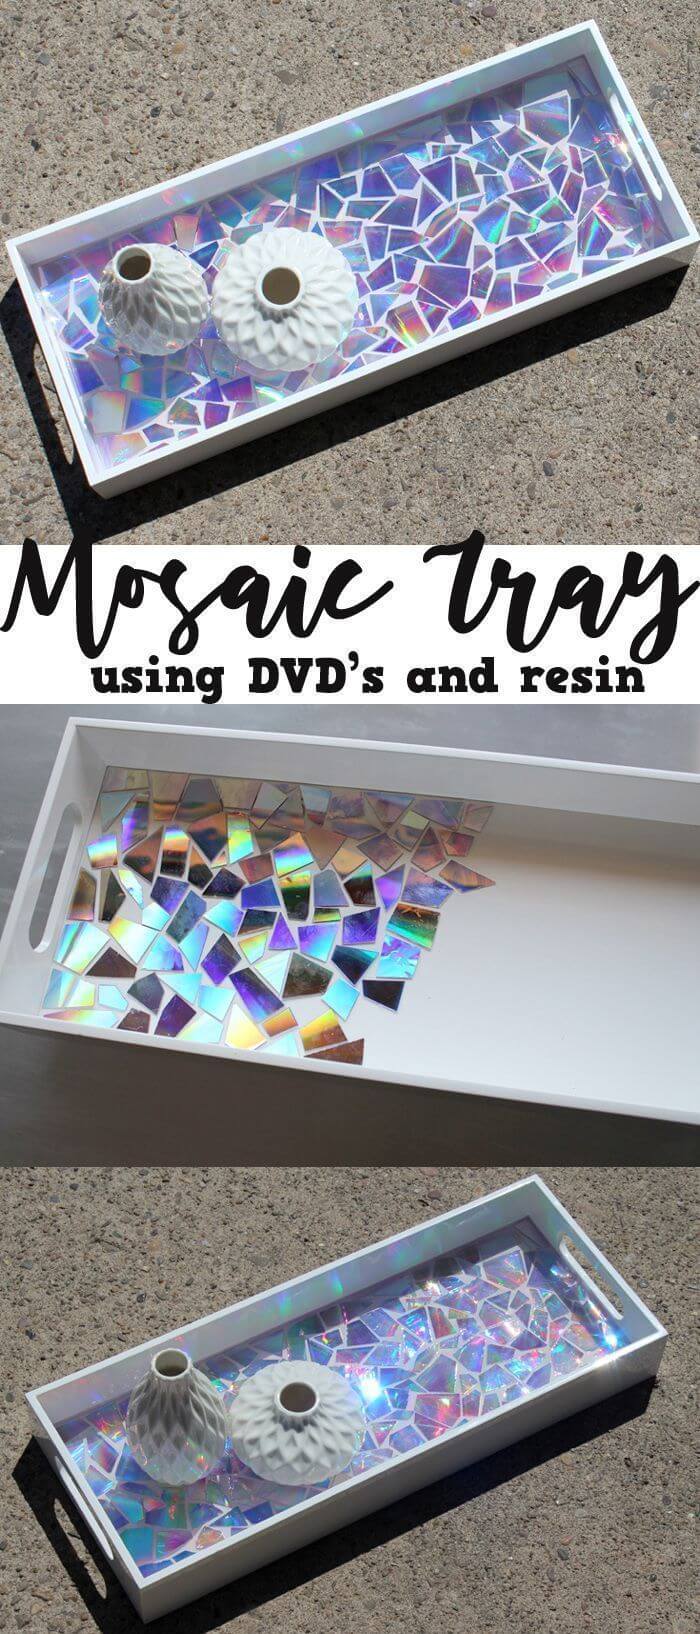 Inventive Use of DVDs in a Mosaic